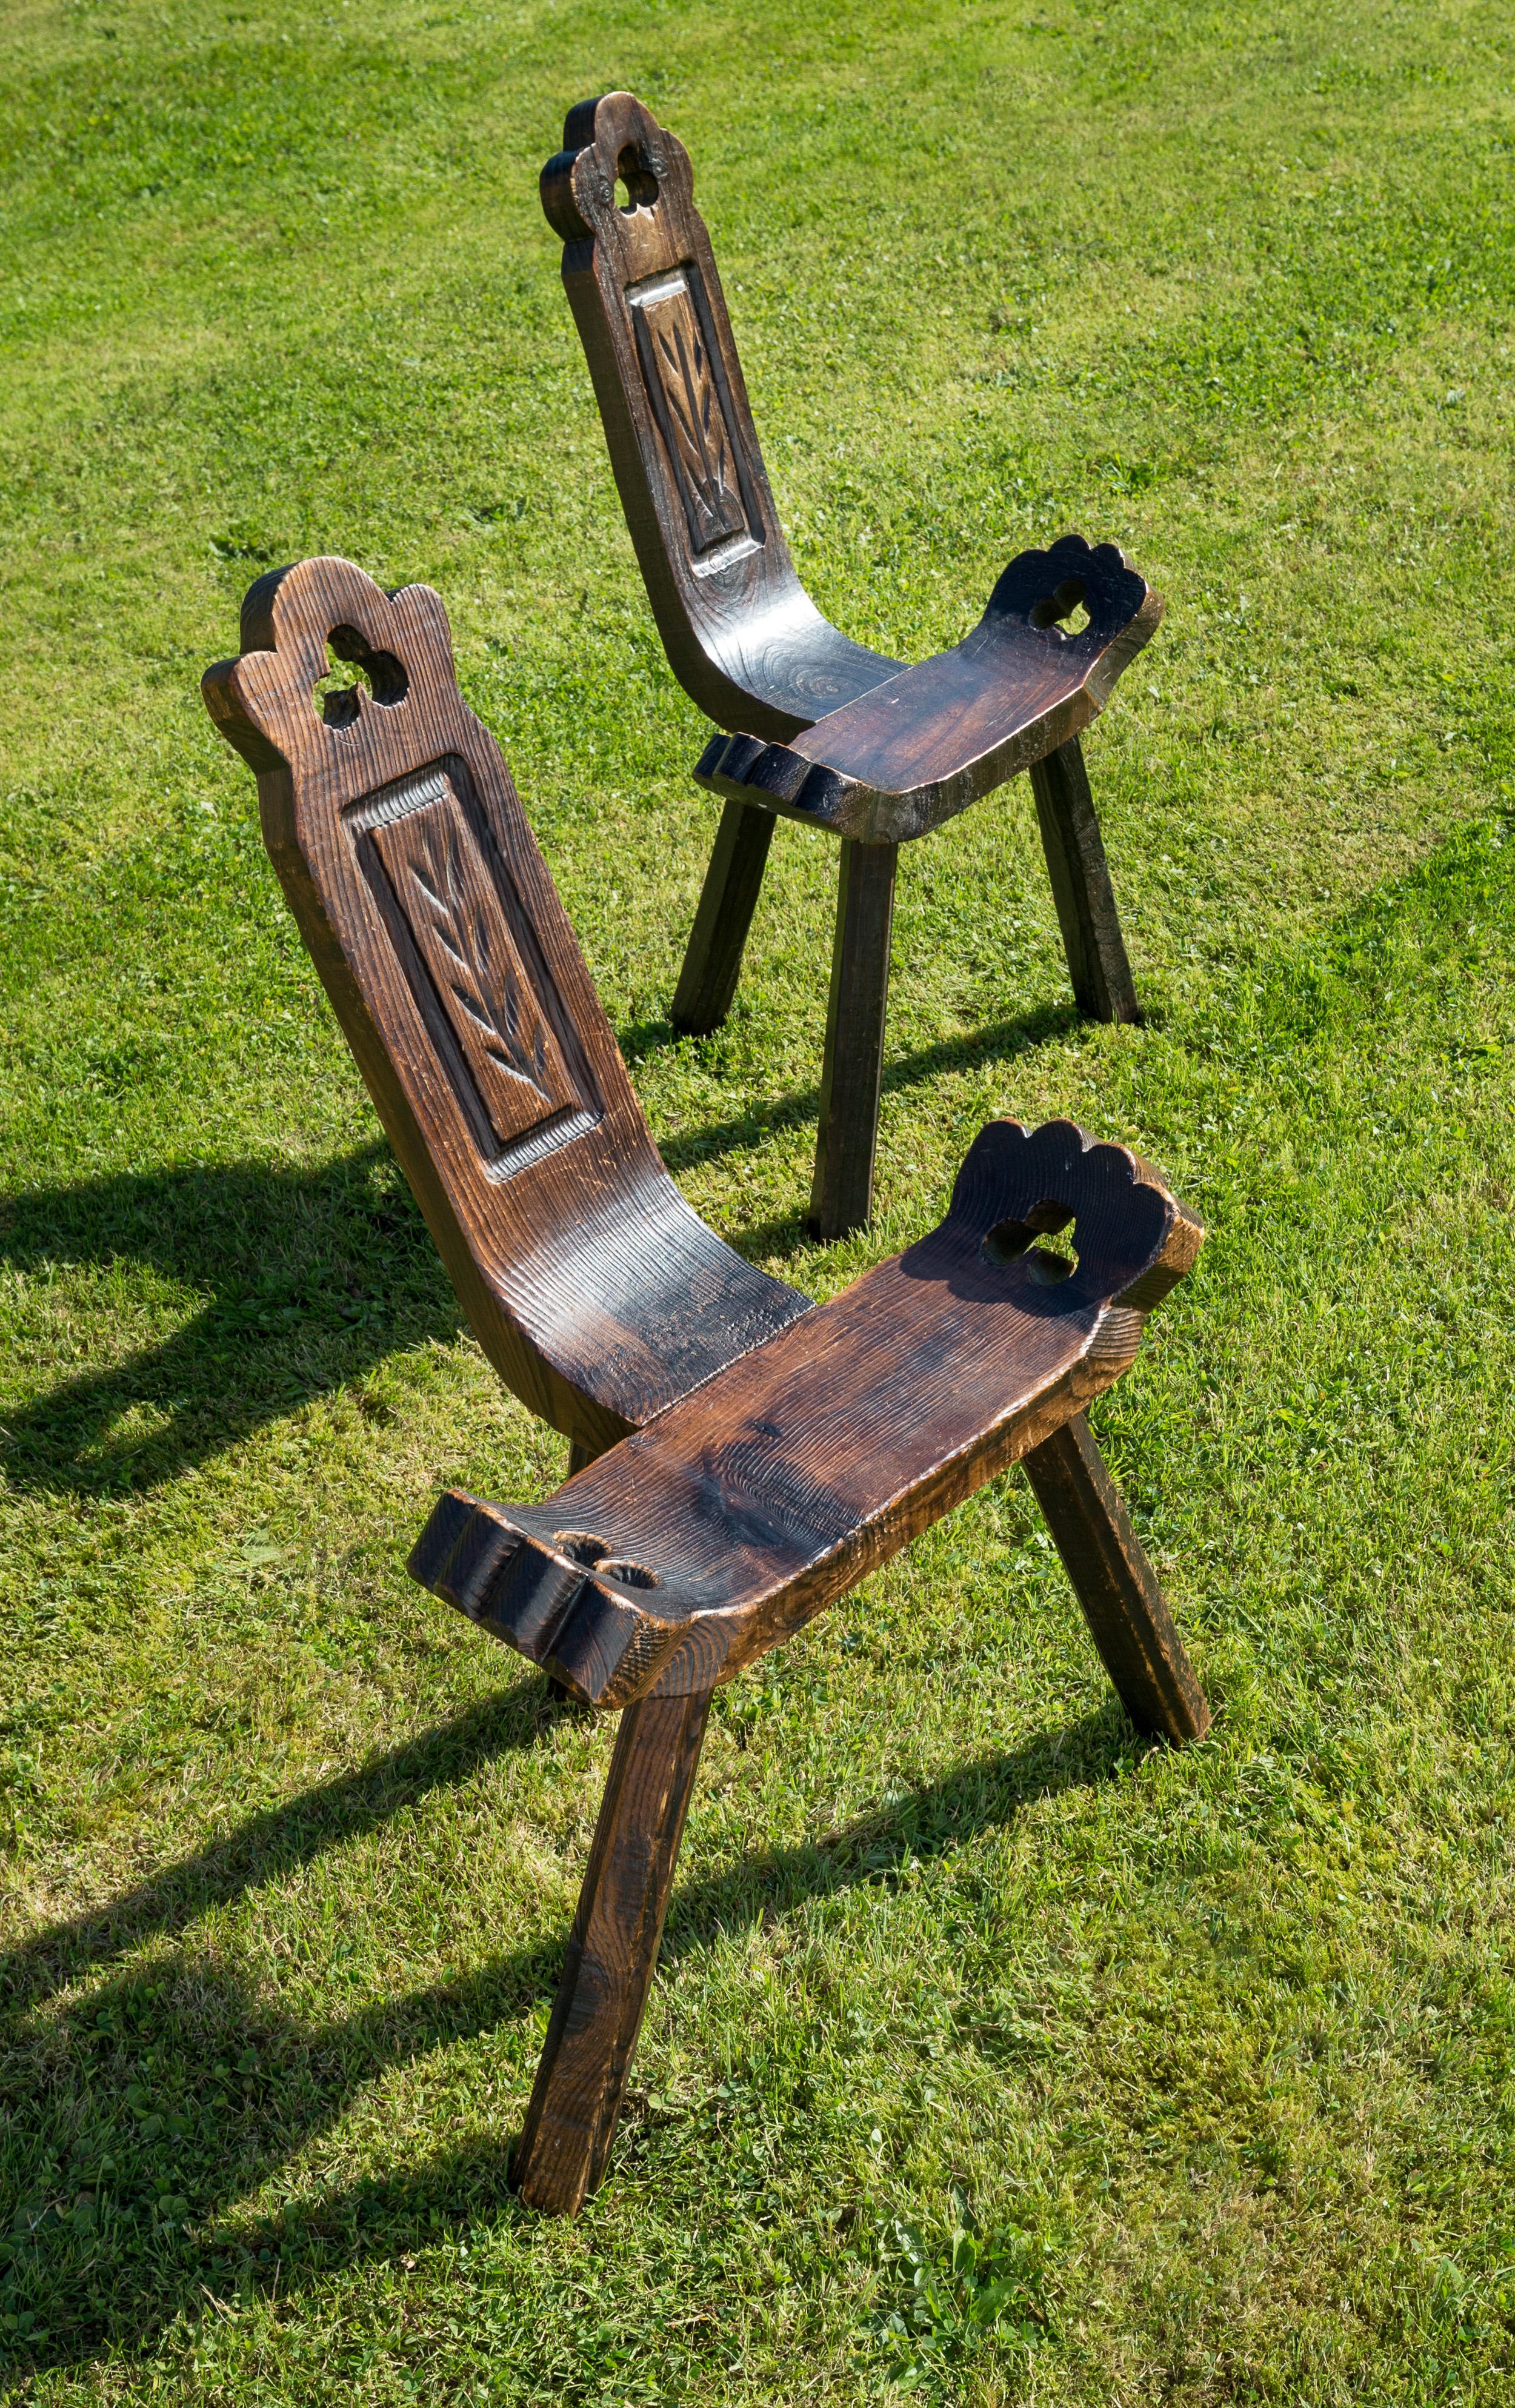 An amazing part of Social History these chairs are not Welsh Milking Chairs or Romany Gypsy Chairs - they were designed and built for one purpose in mind, birthing.

The principle being that it is easier to give birth in a Vertical position, not